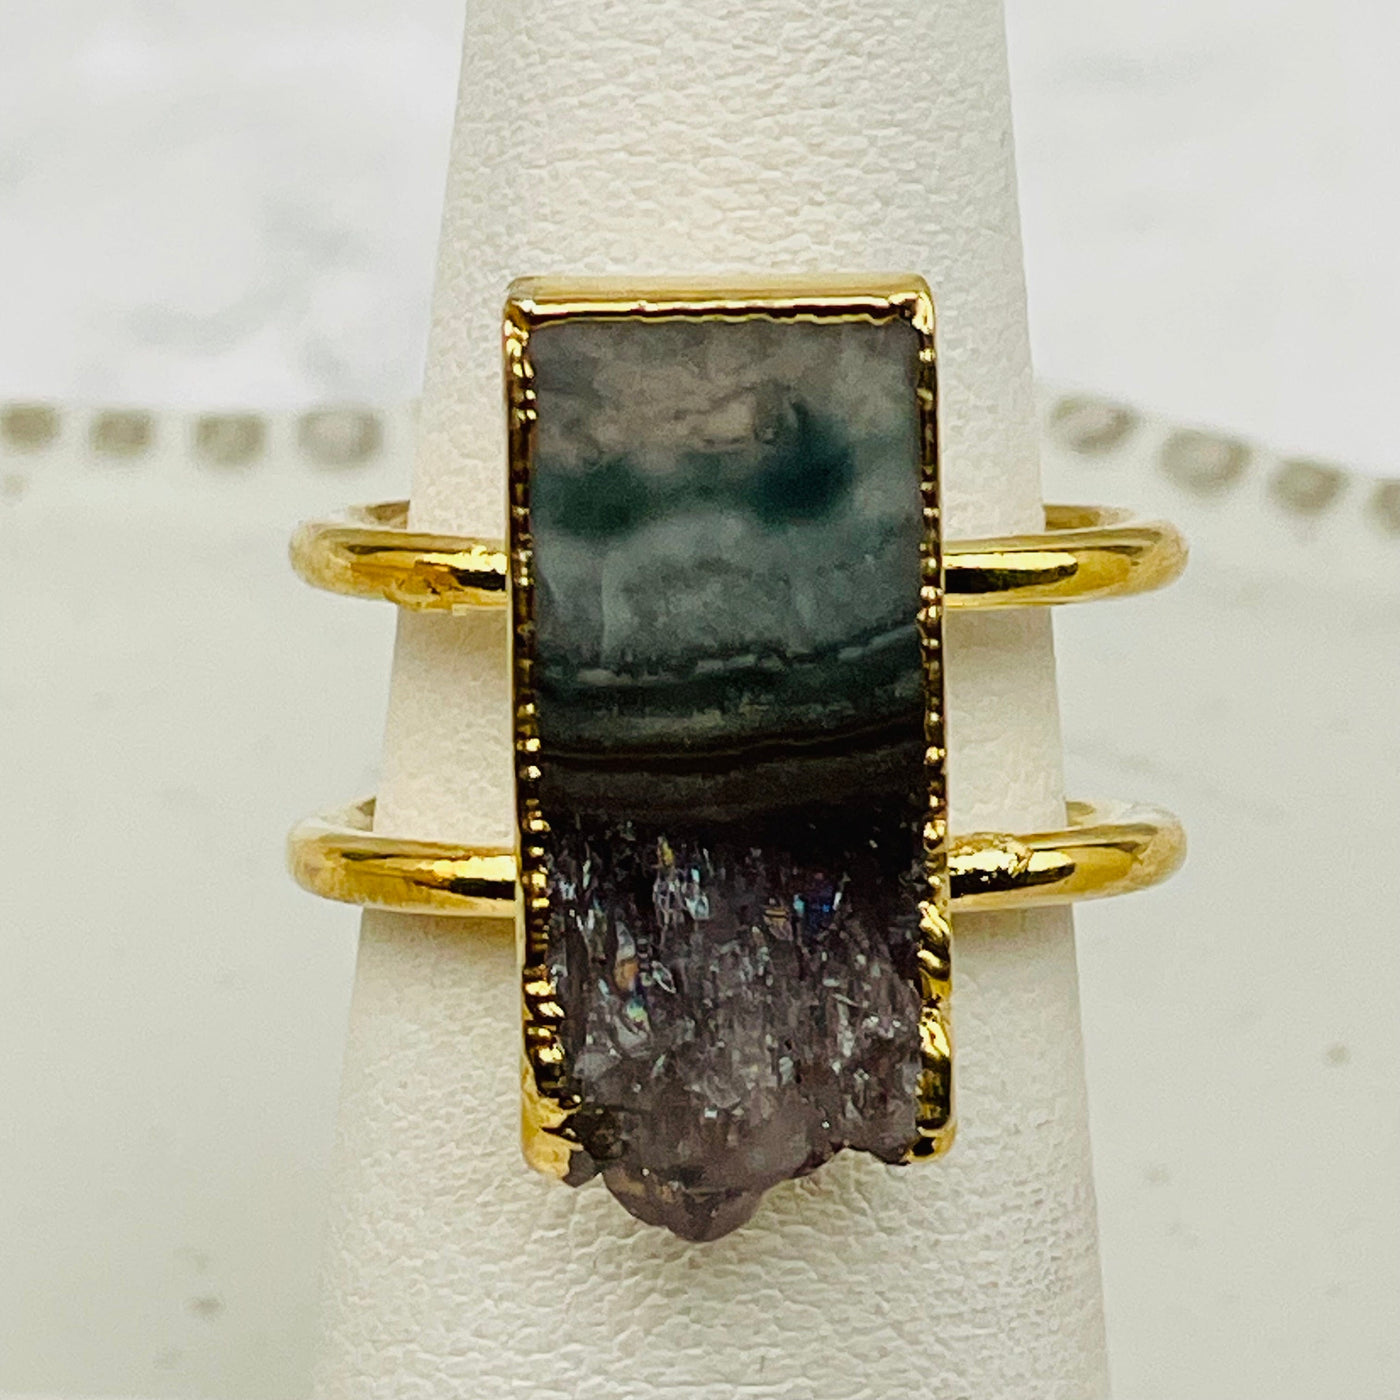 close up of the amethyst slice on this ring